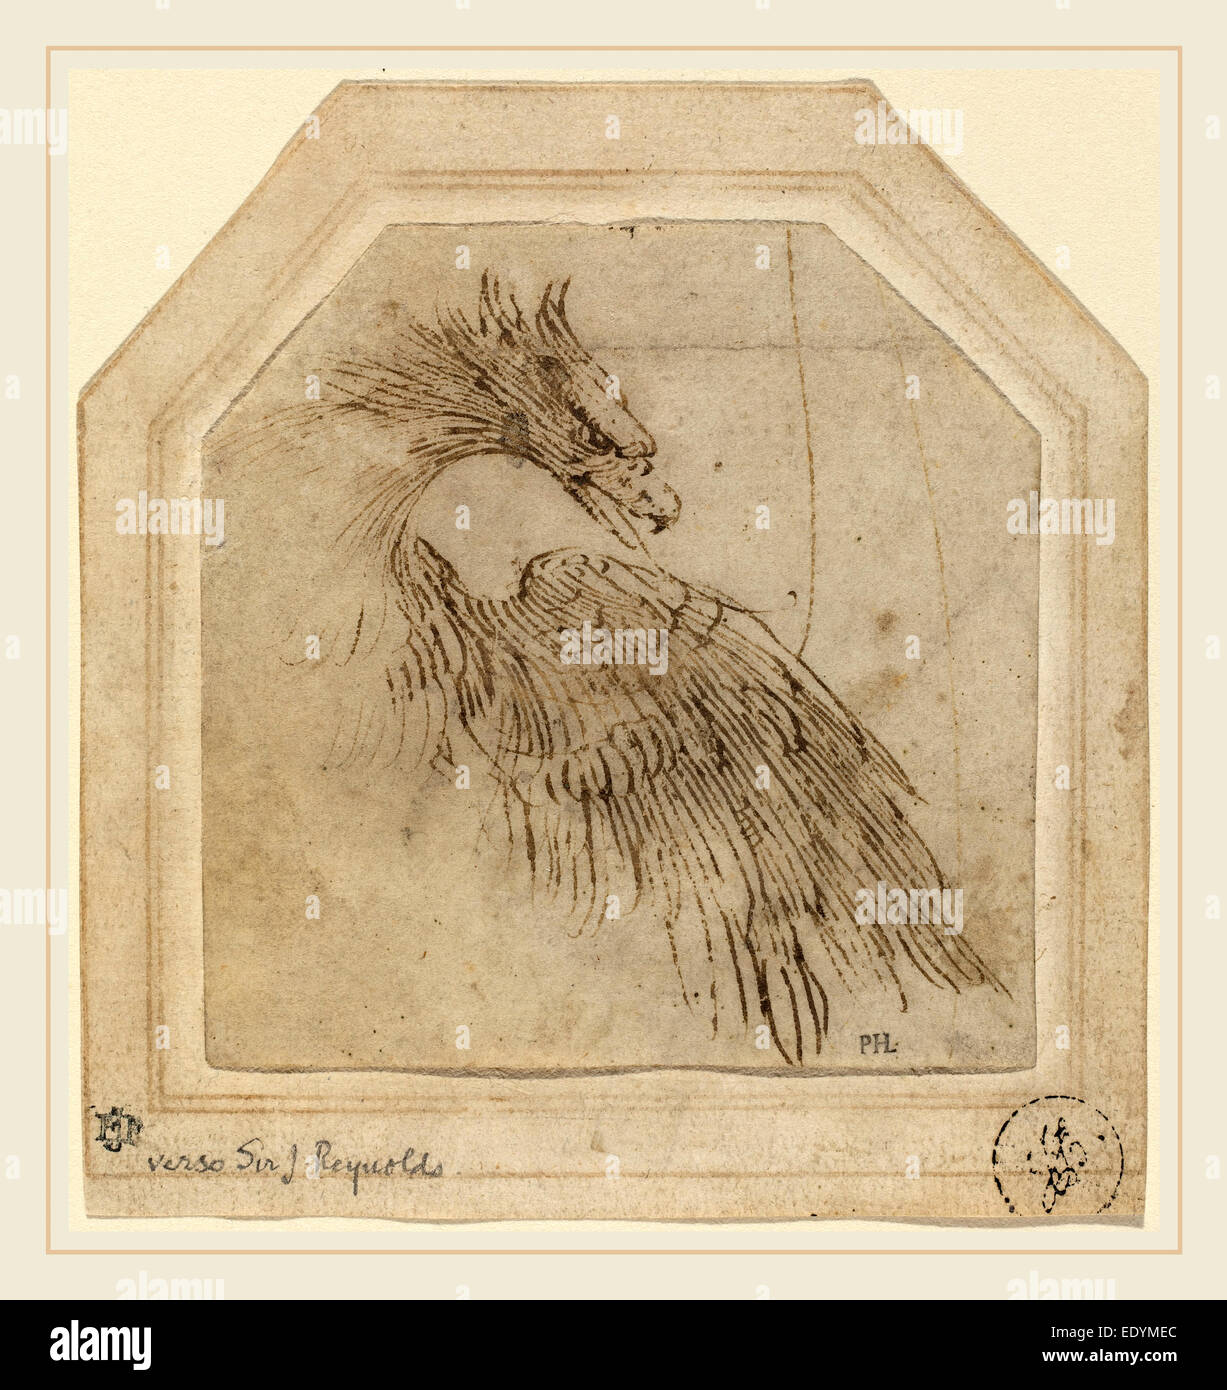 Titian, Italian (c. 1490-1576), An Eagle, c. 1515, pen and brown ink on laid paper Stock Photo